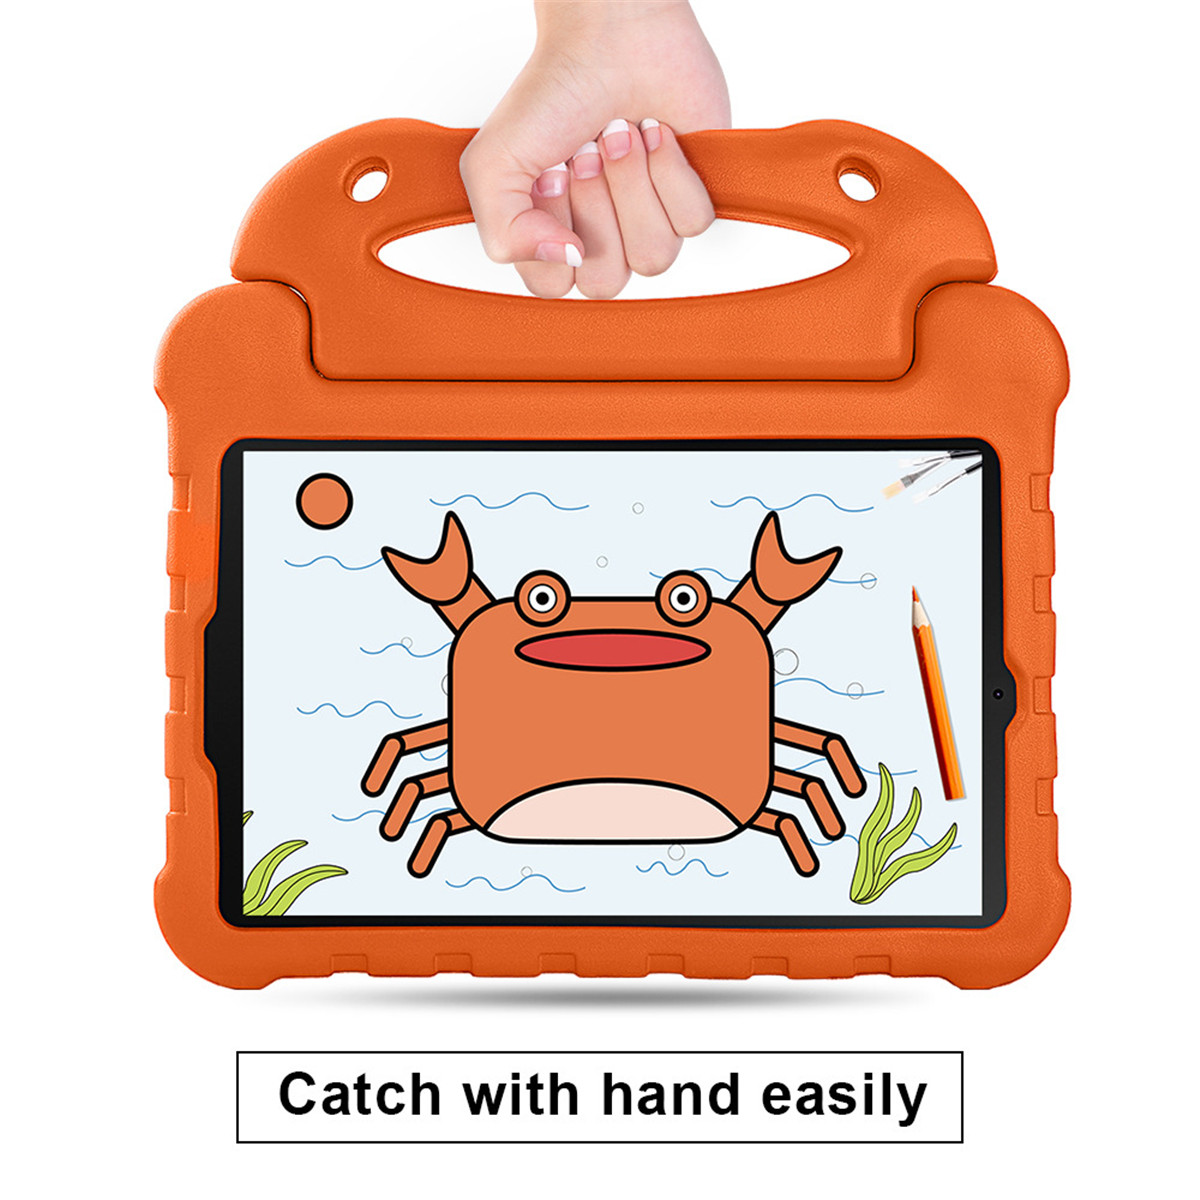 Portable-Kids-Friendly-Safe-EVA-with-Handle-Bracket-Stand-Tablet-Shockproof-Protective-Case-for-iPad-1777875-8